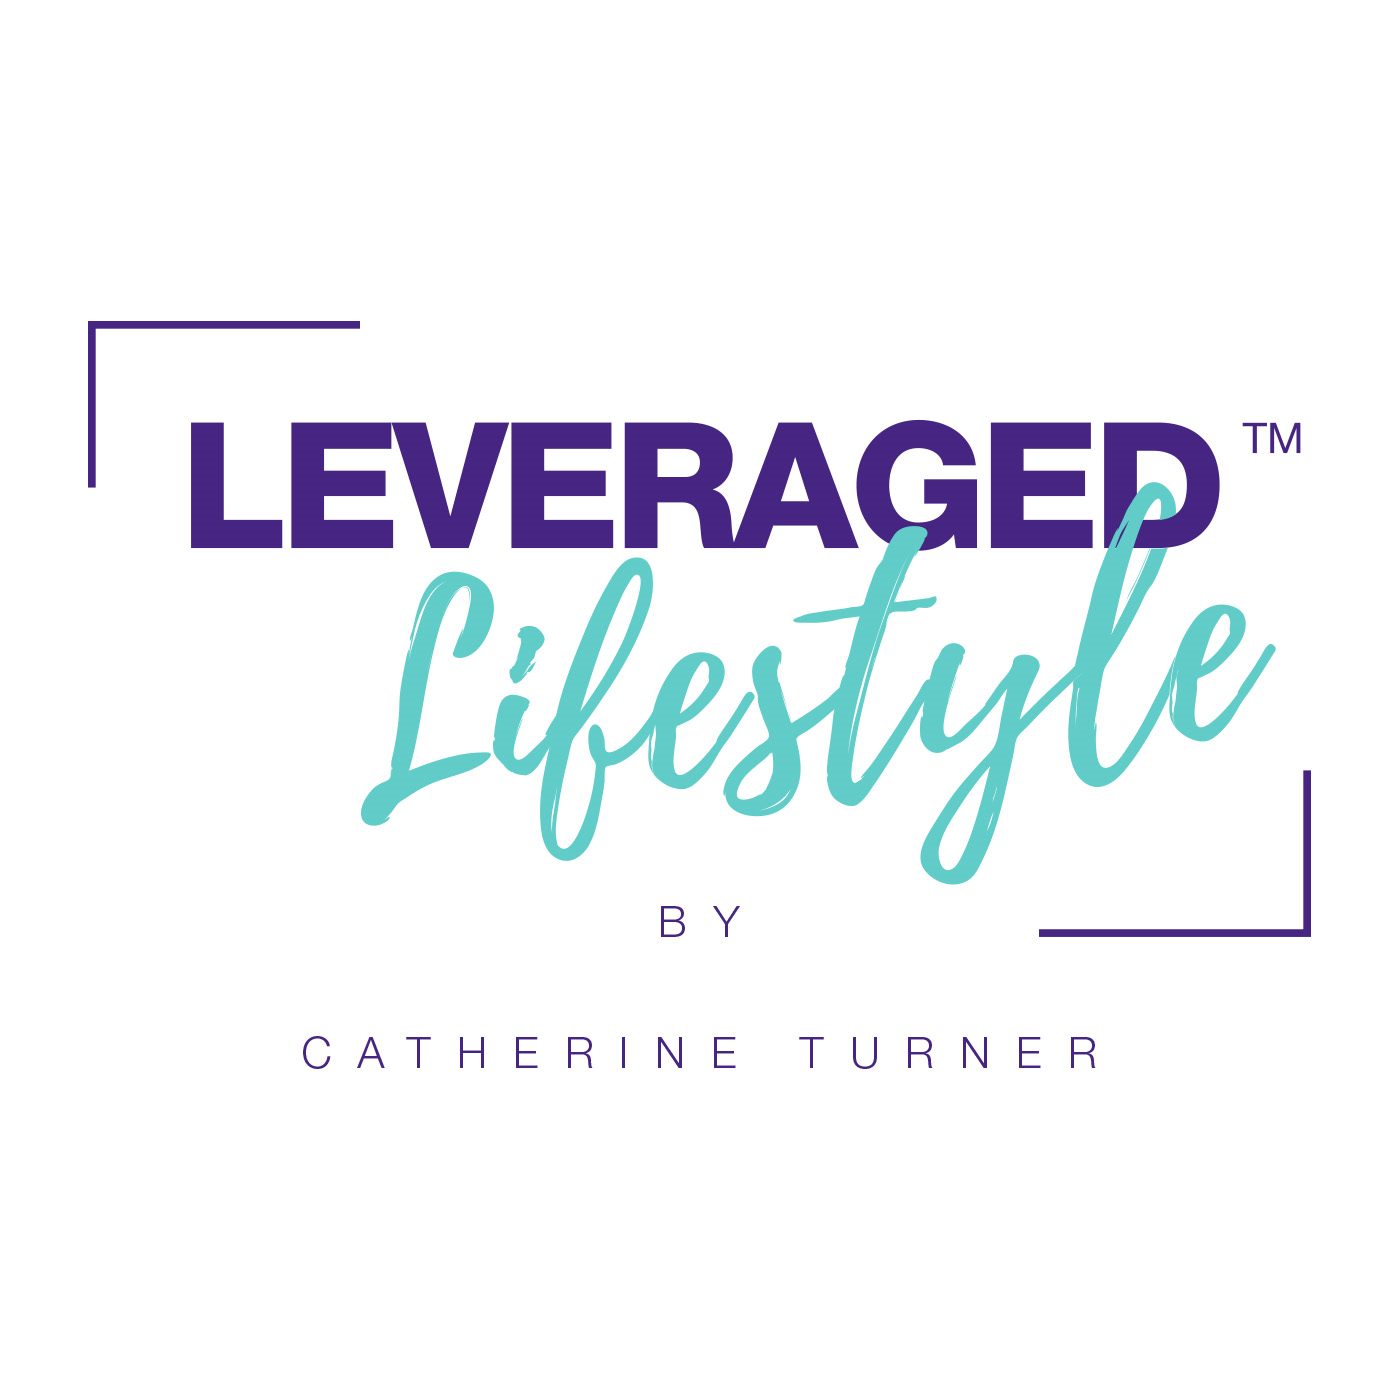 Leveraged Lifestyle Podcast 100th Episode - Freedom, Creativity, Choice & Opportunity, Finding the Ultimate Leveraged Lifestyle